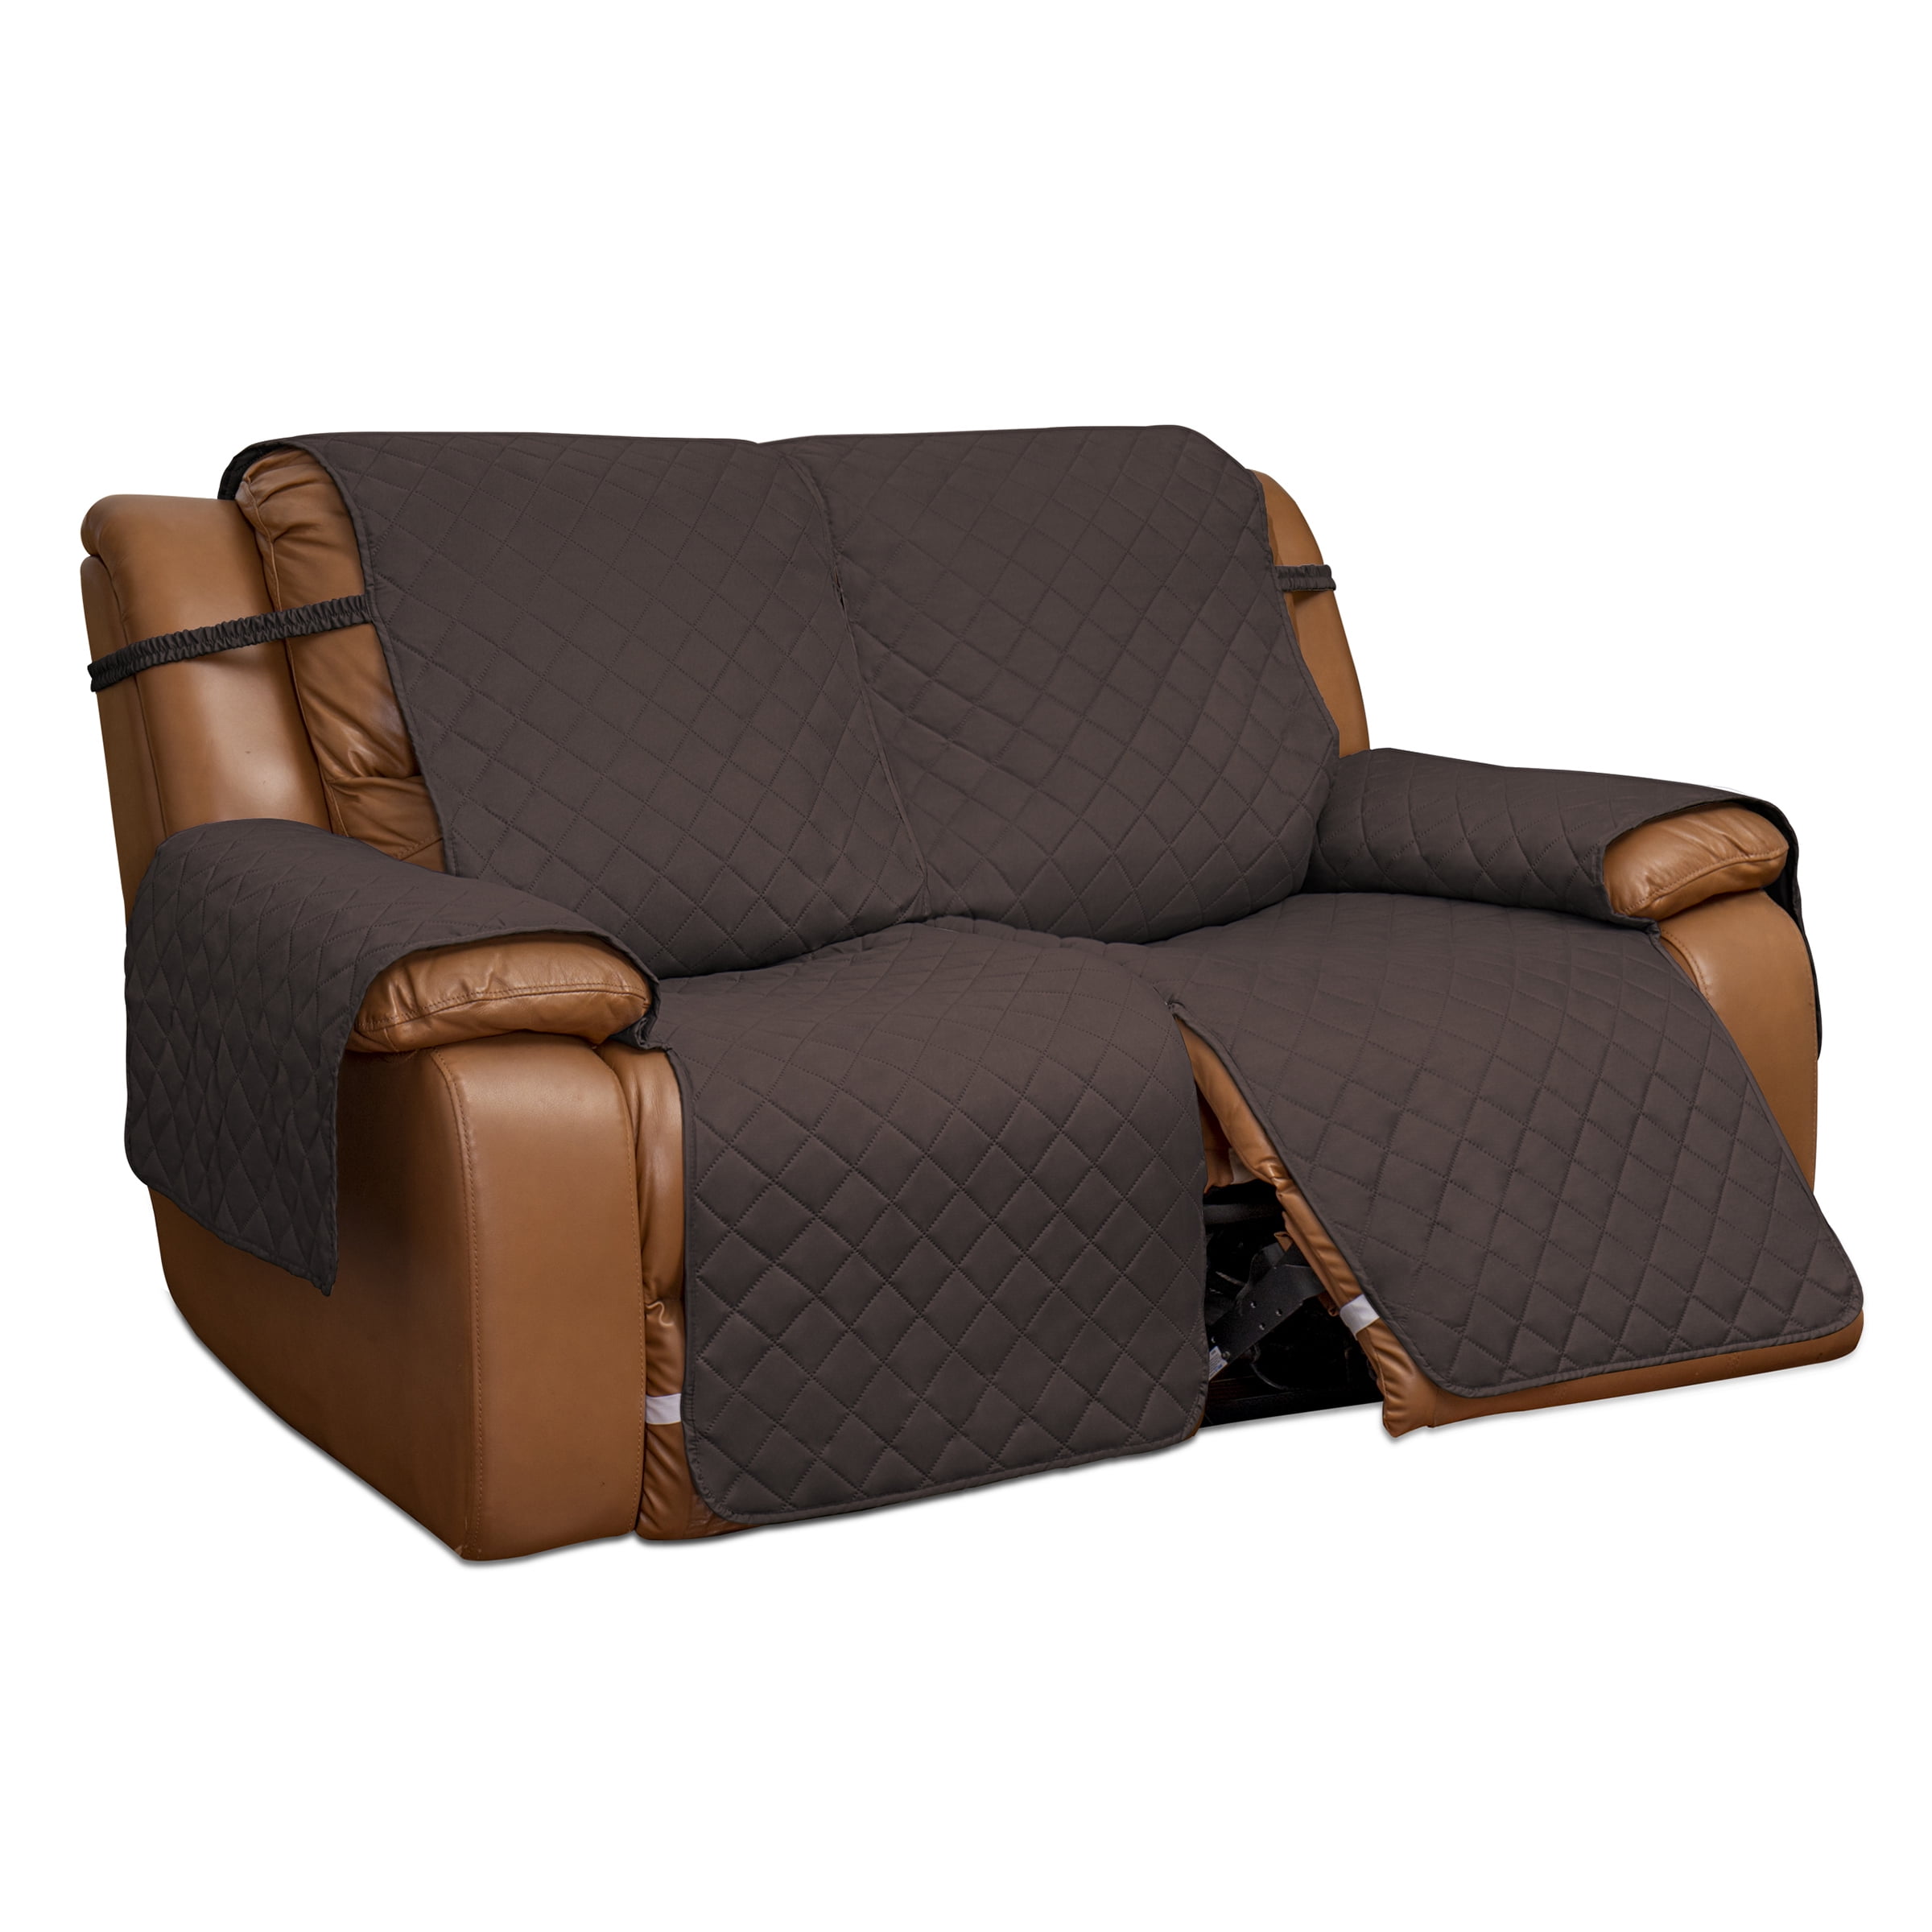 100% Waterproof Recliner Cover and Sofa Cover Bundle